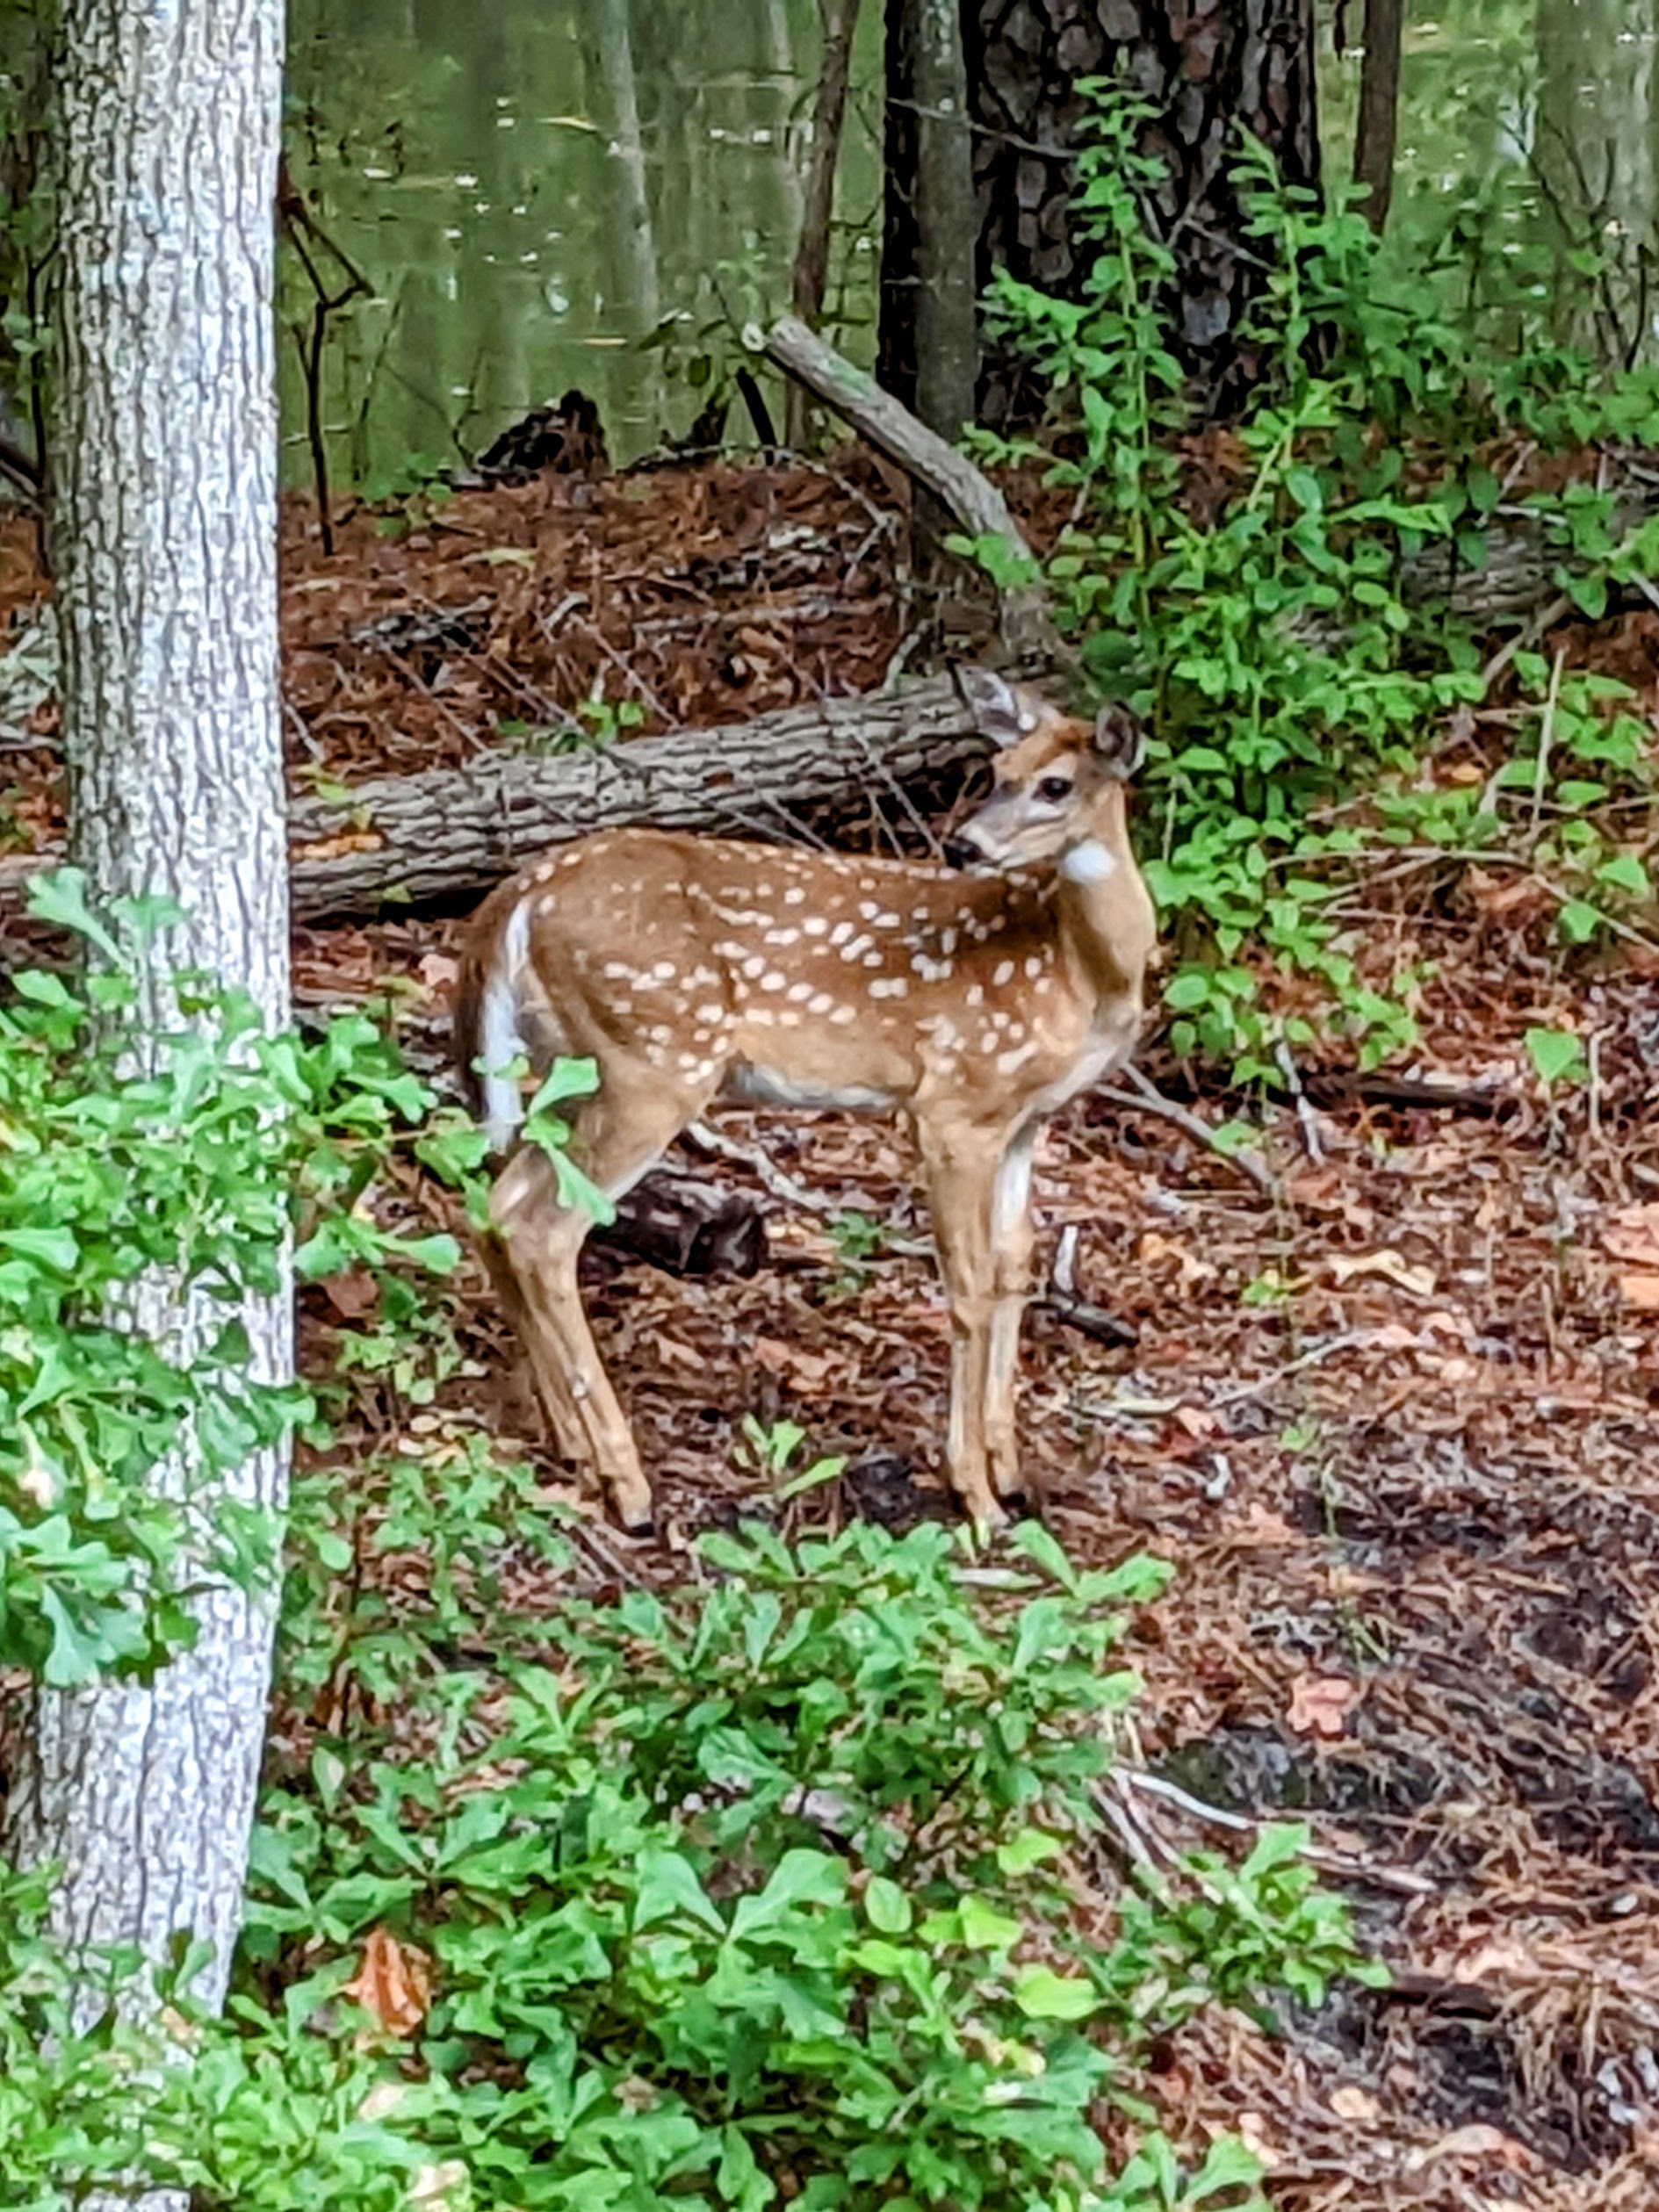 A fawn stands in the woods, looking back amidst the foliage.